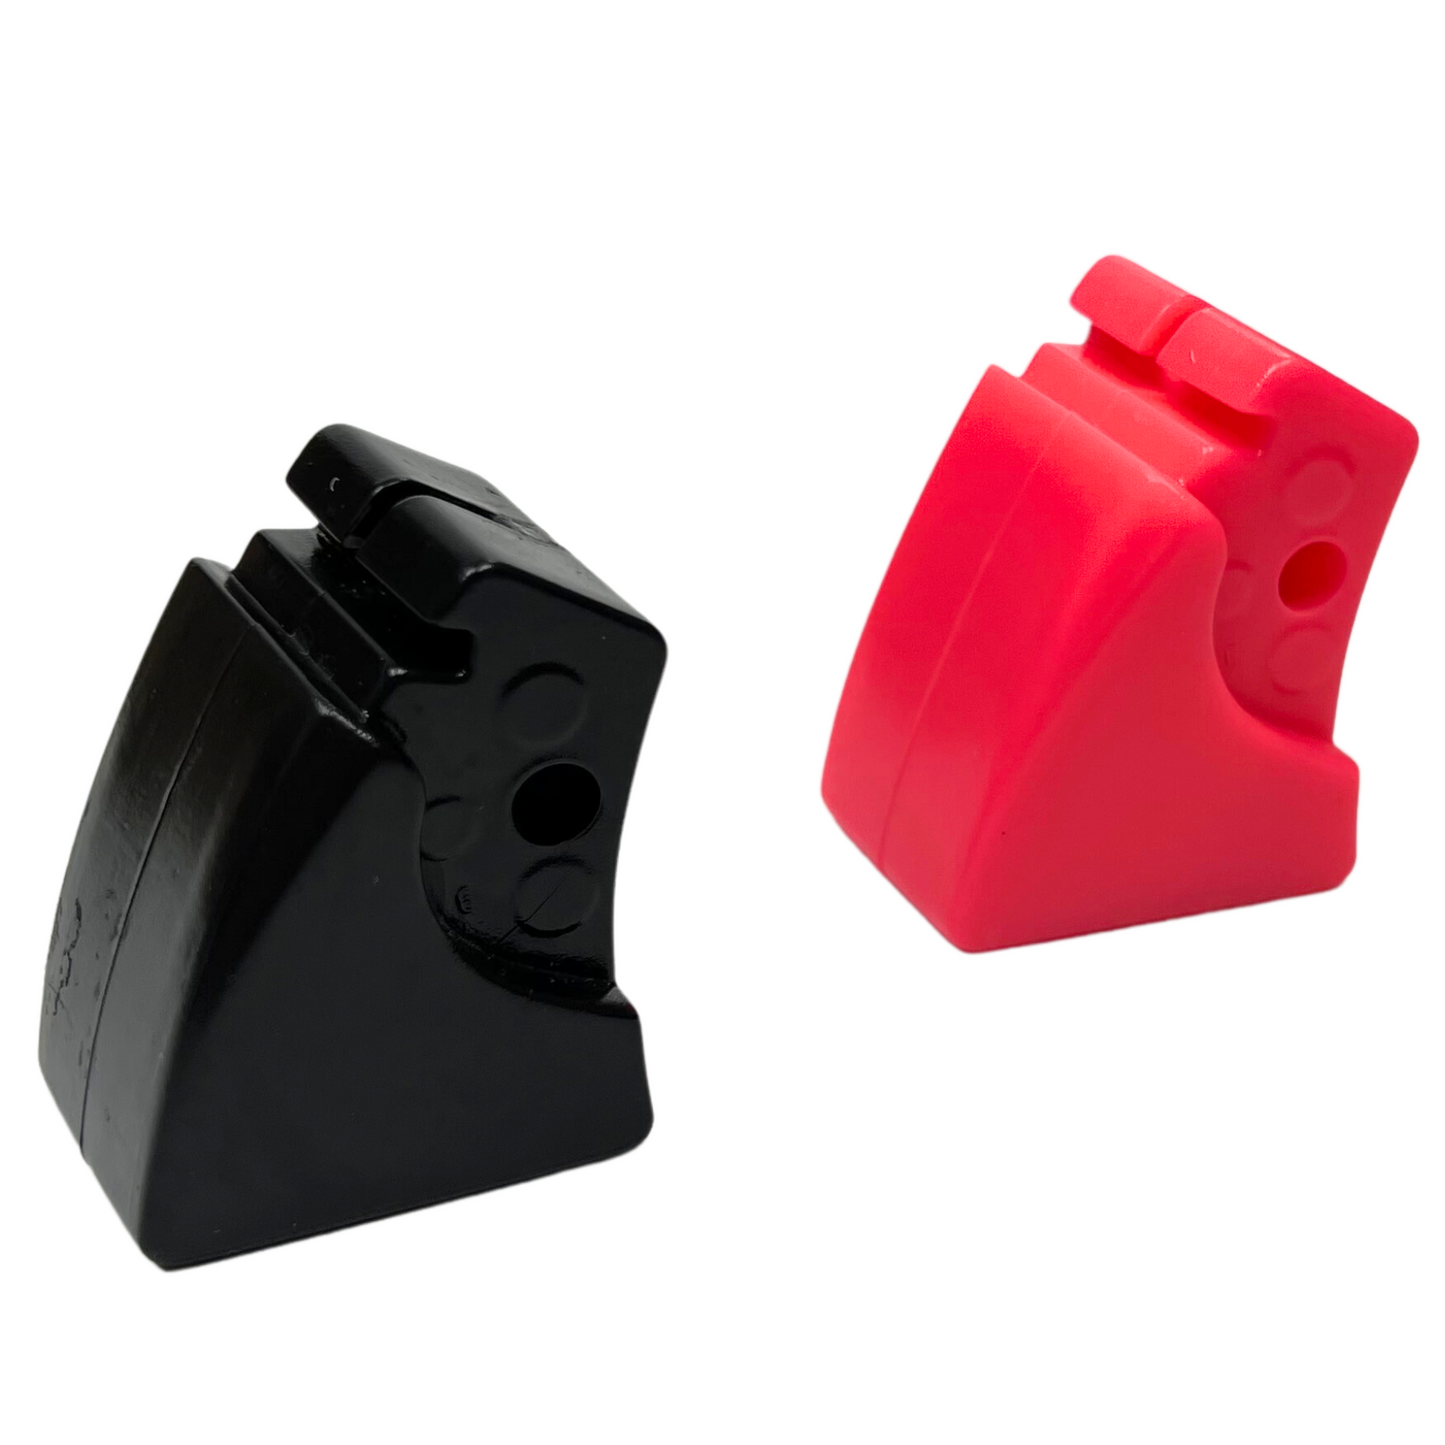 Replacement Heel Stop For Tracer Adjustable Inline Skates